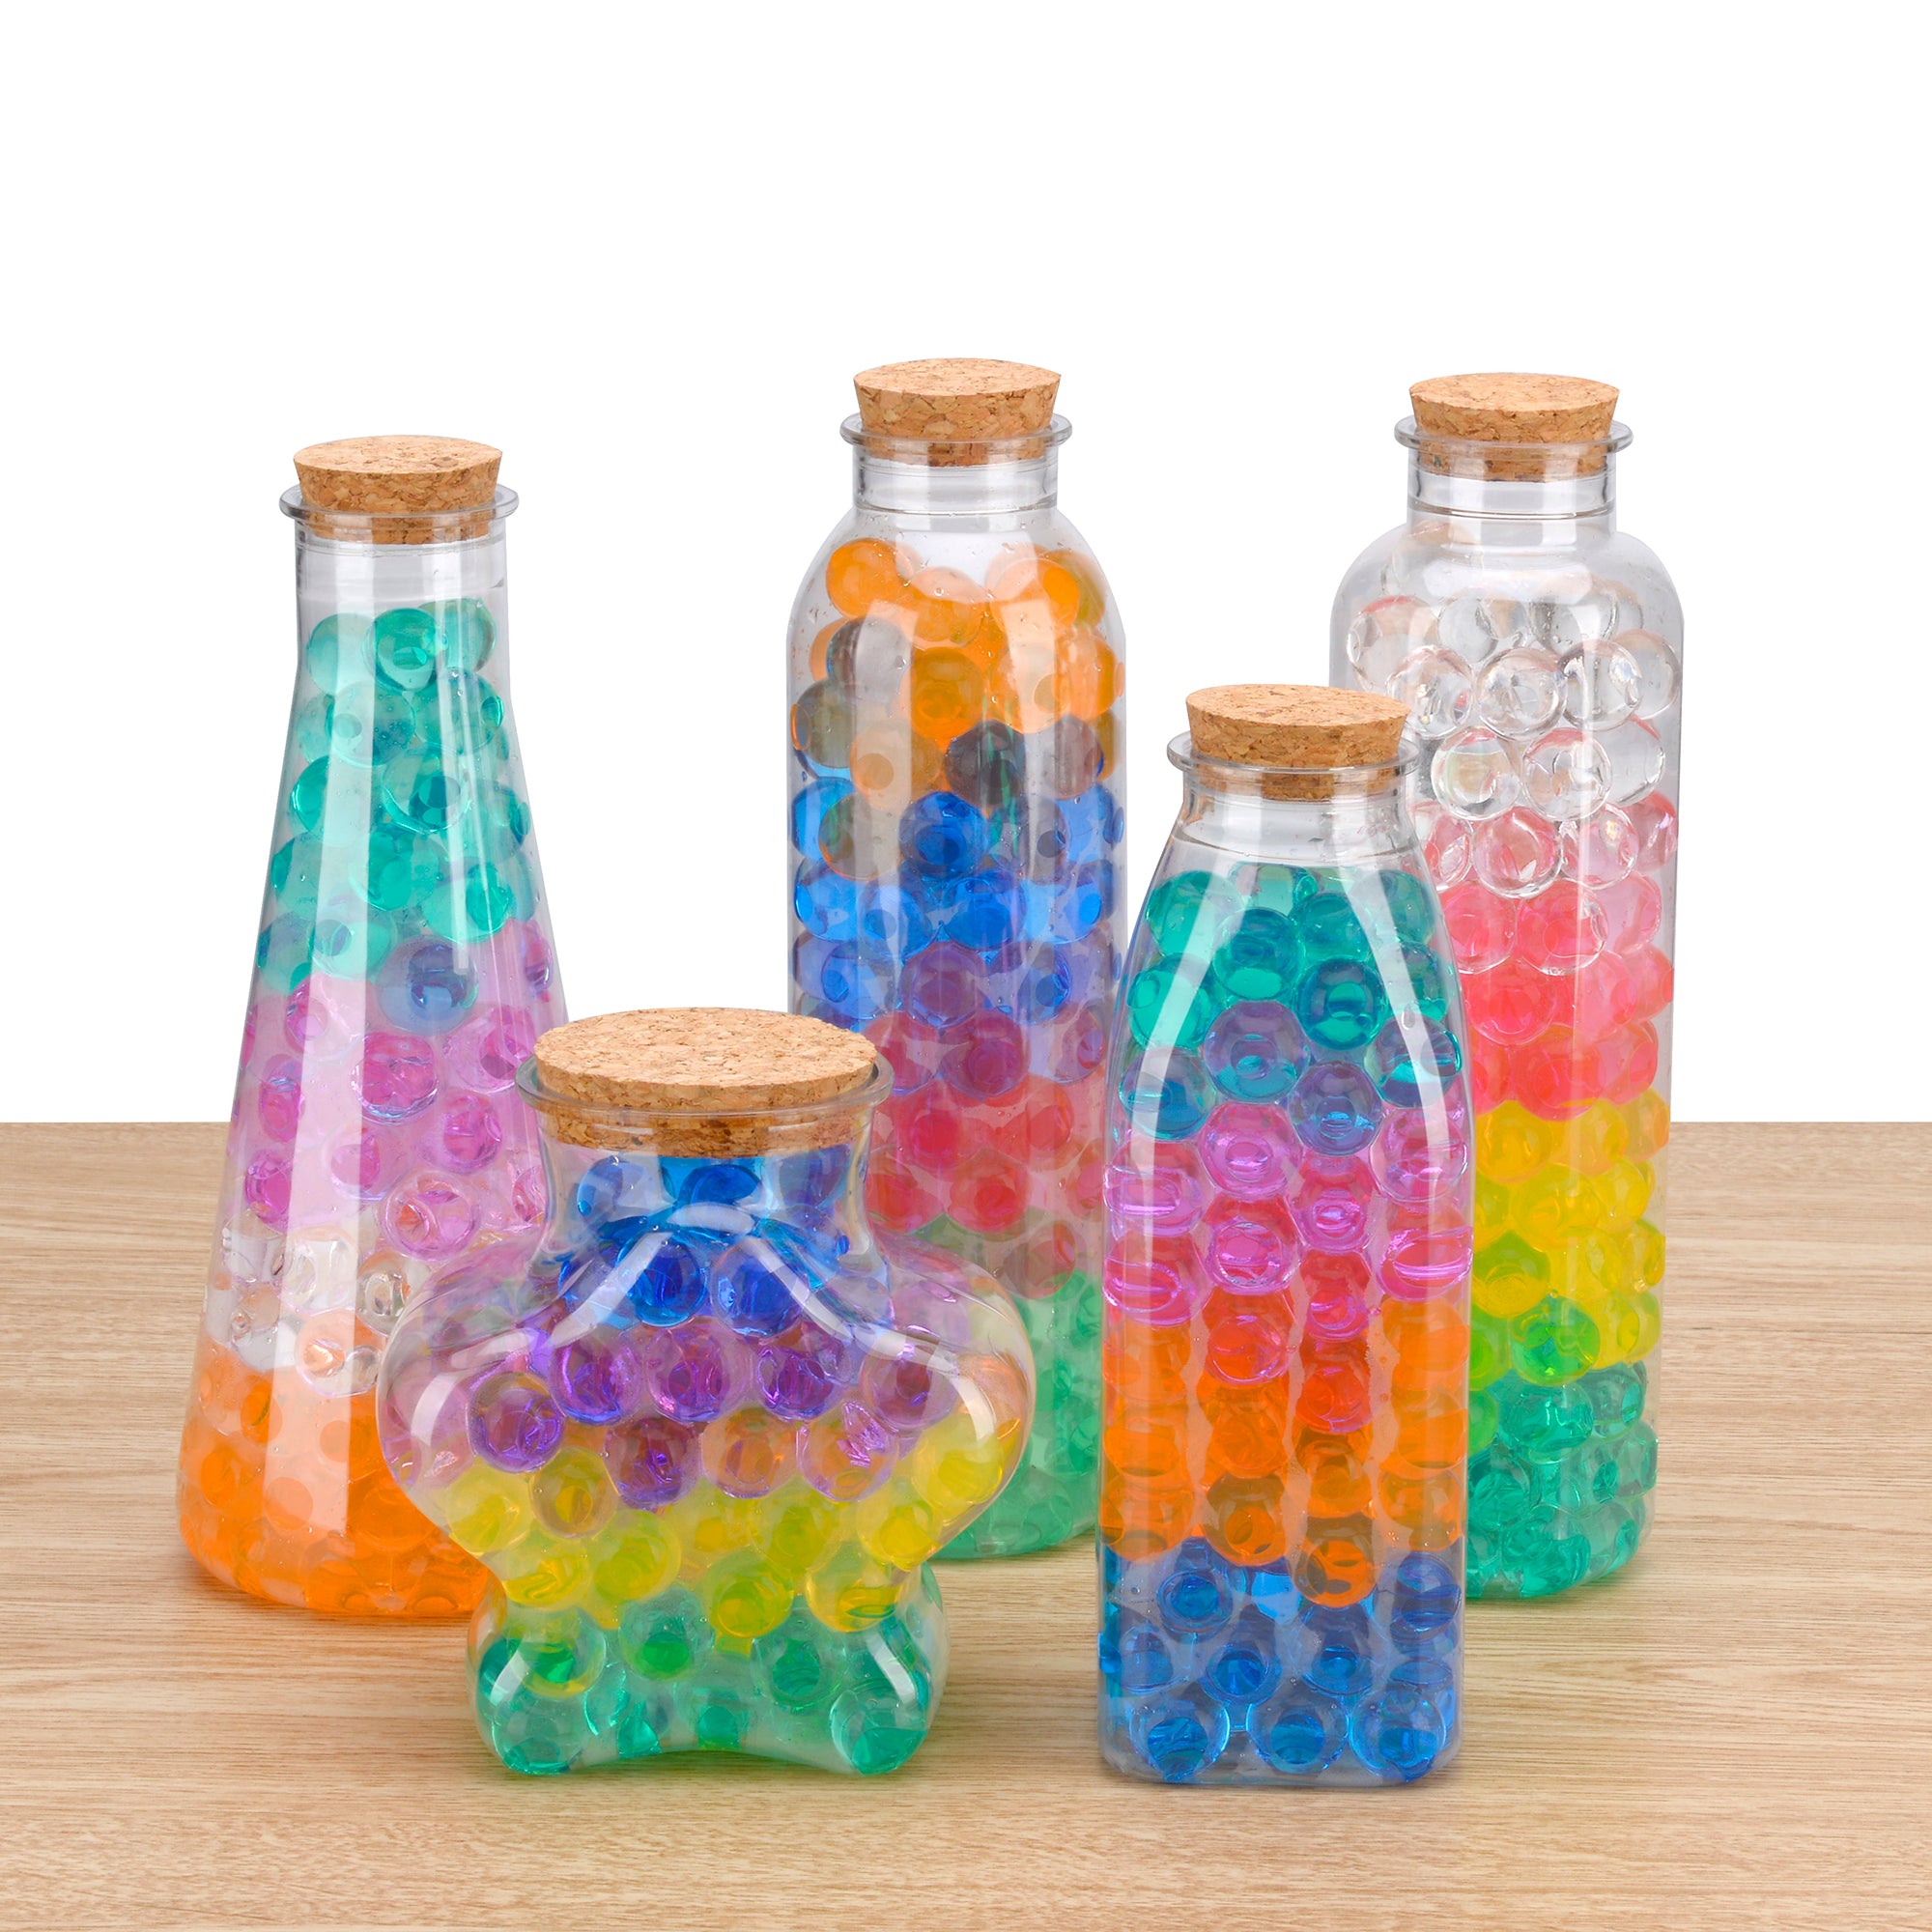 MarvelBeads Water Beads Bottle (9.5 ounce)